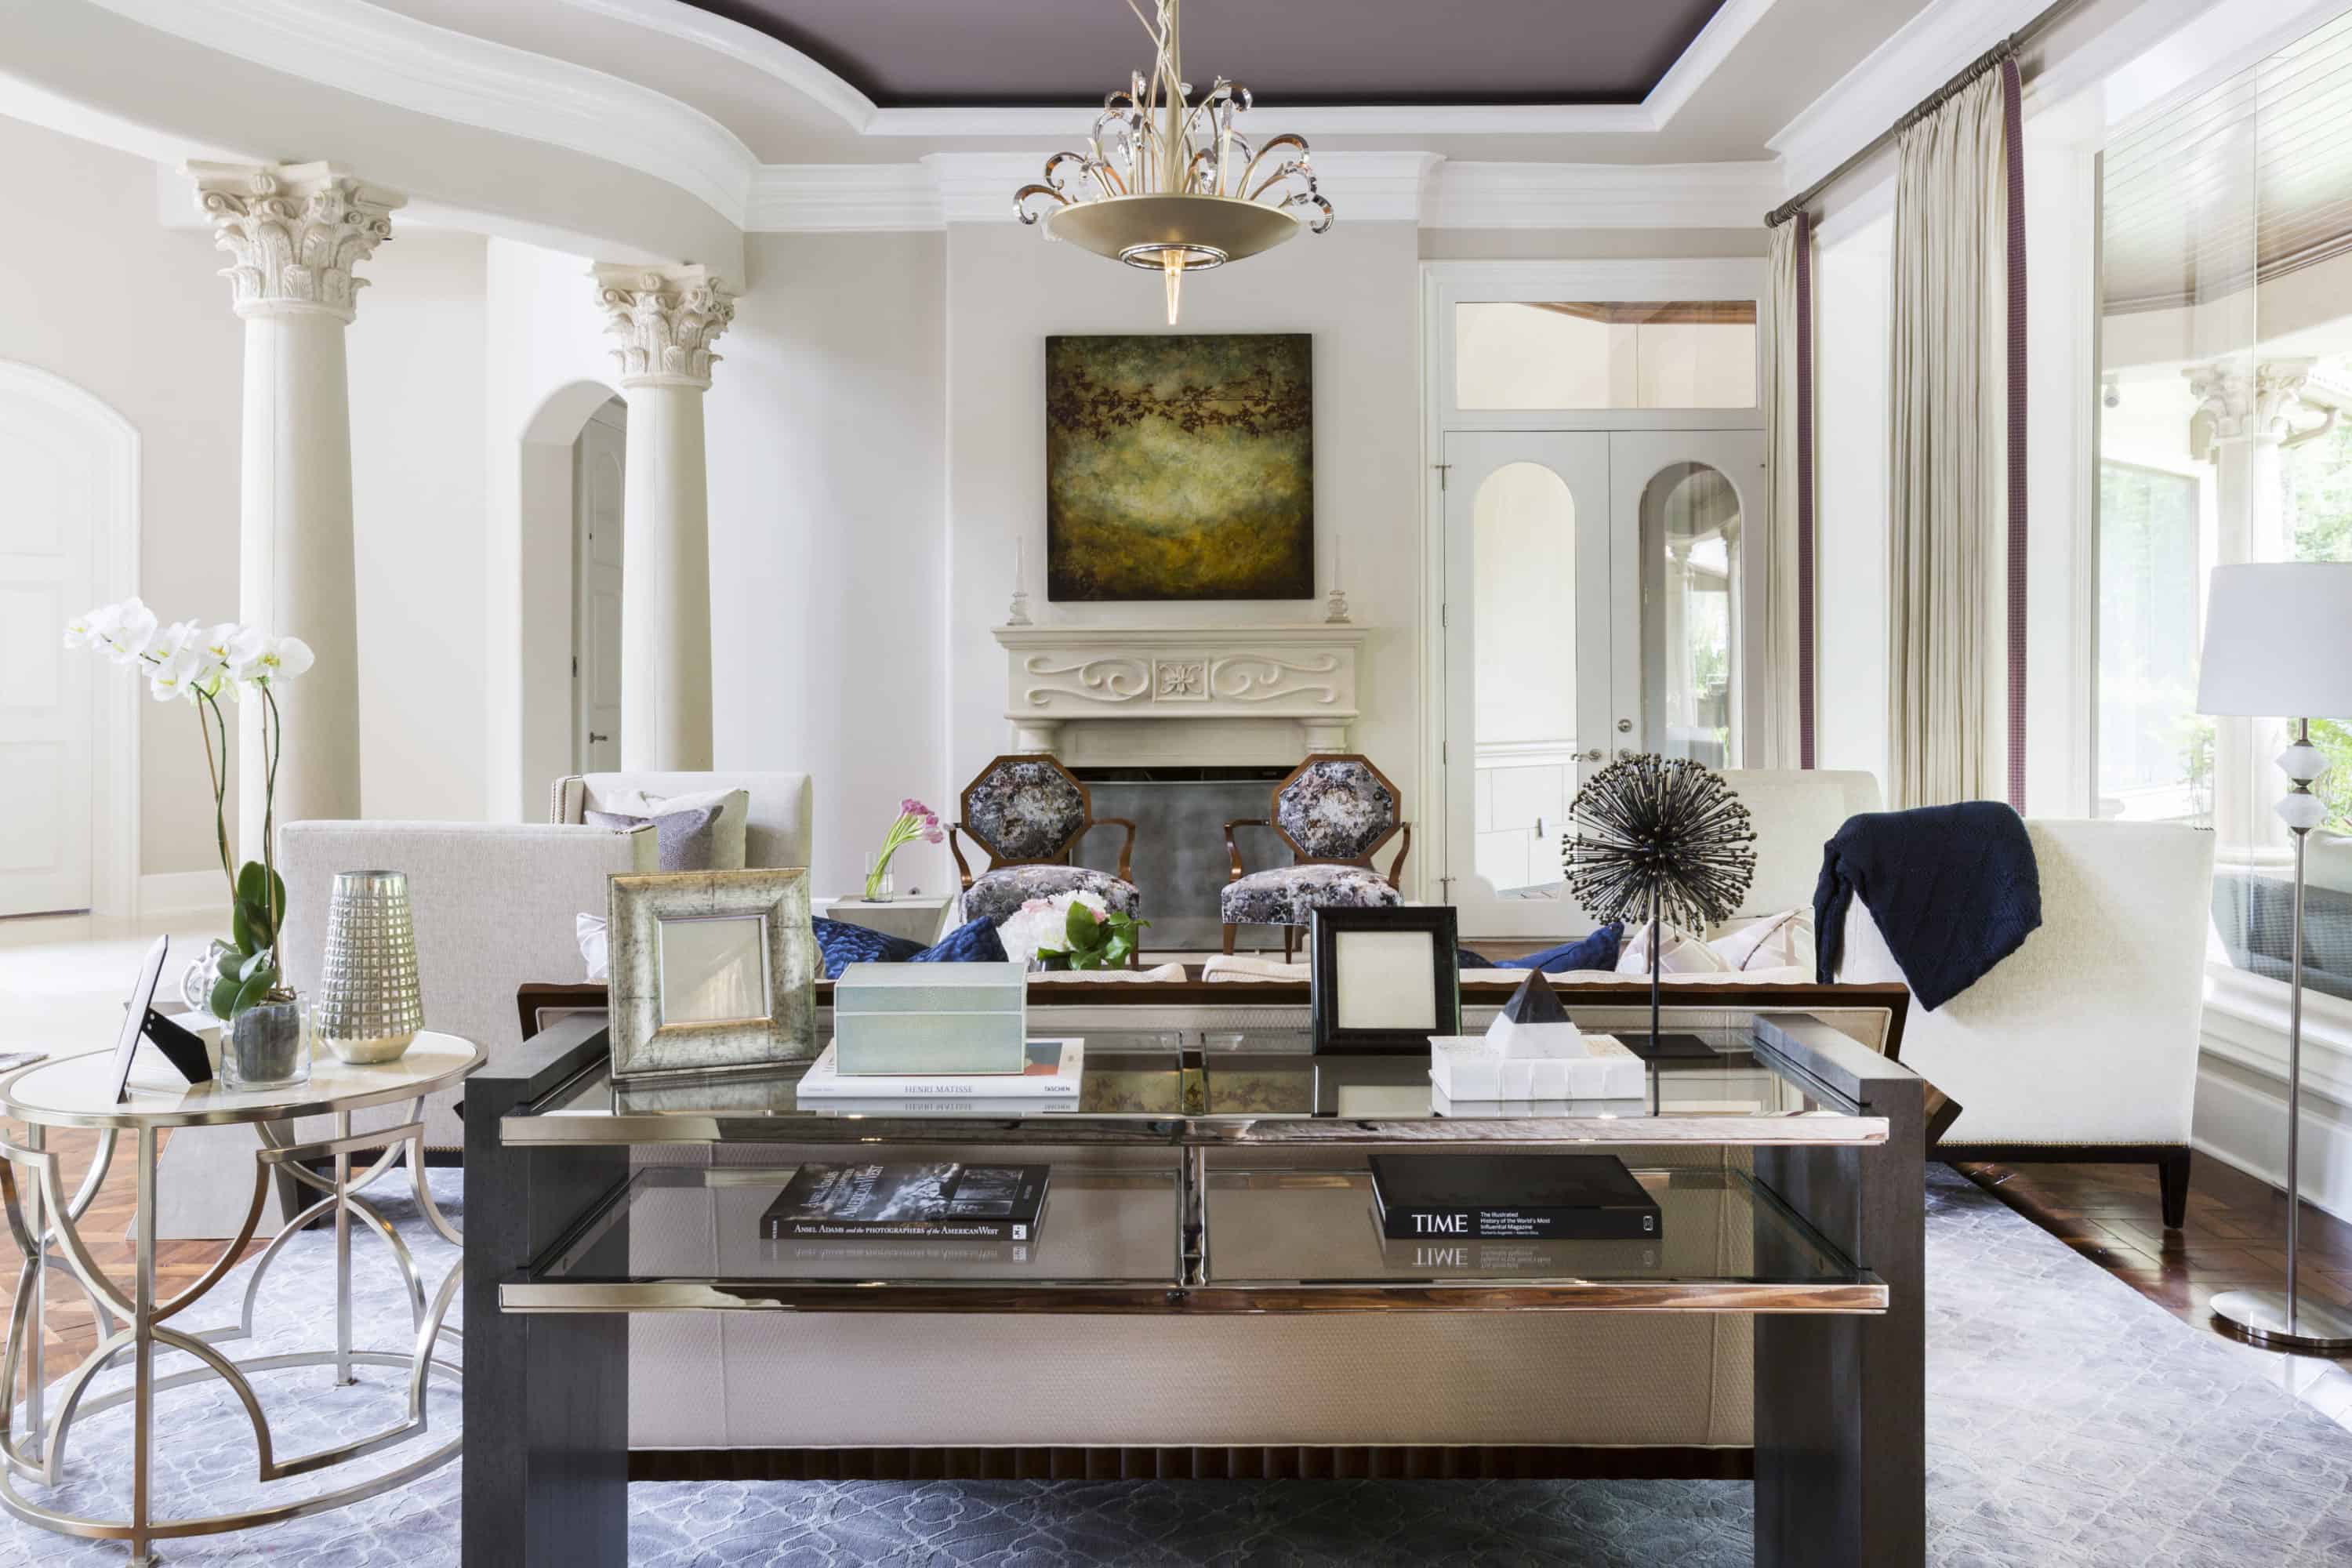 Beautiful octagonal chairs from Century Furniture add sophistication to this regal living room